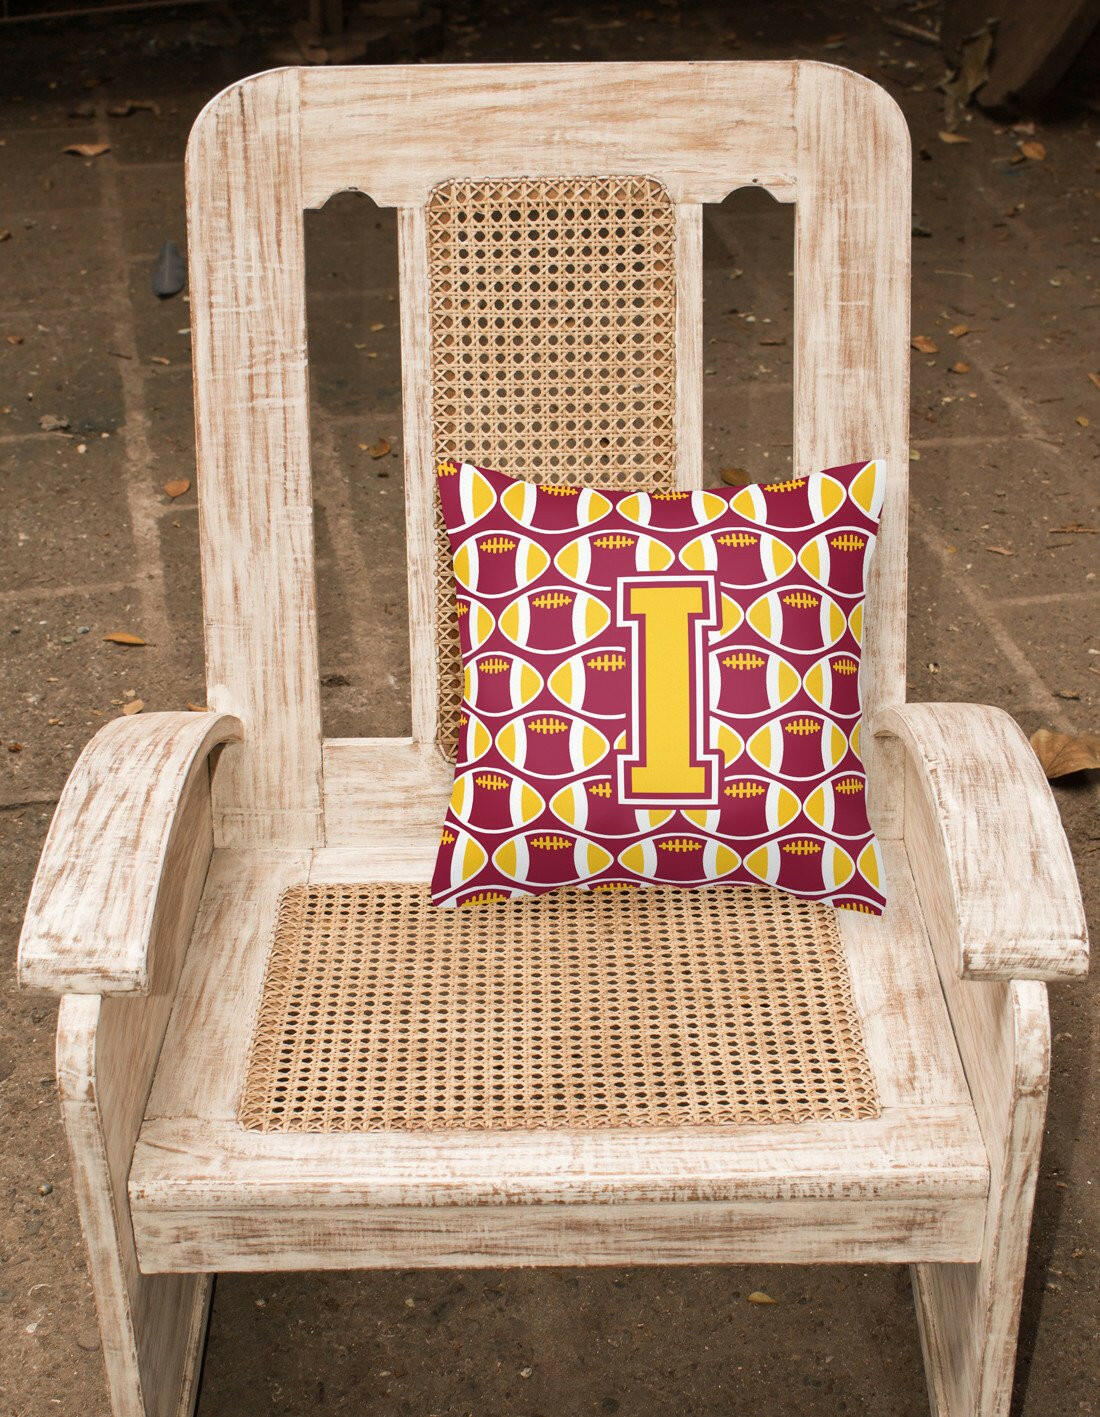 Letter I Football Maroon and Gold Fabric Decorative Pillow CJ1081-IPW1414 by Caroline's Treasures